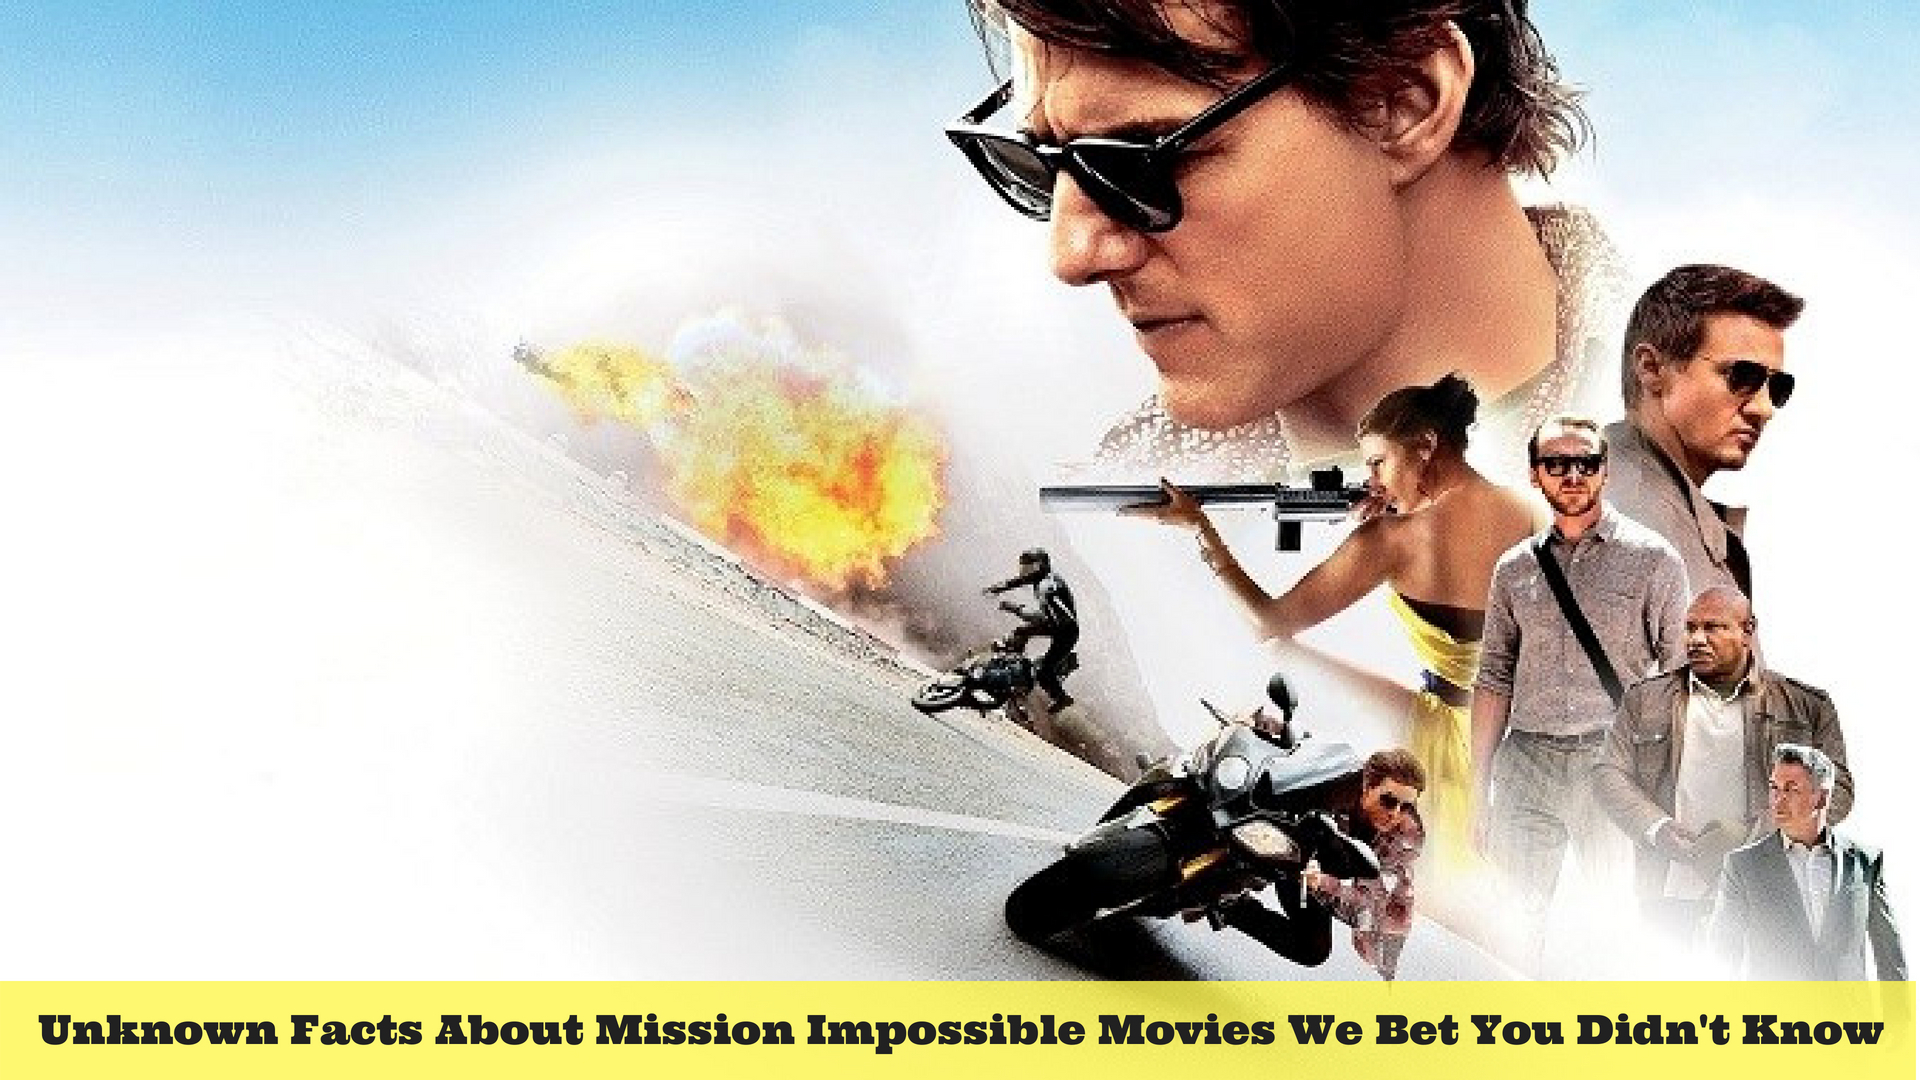 Mission Impossible movies Unknown Facts